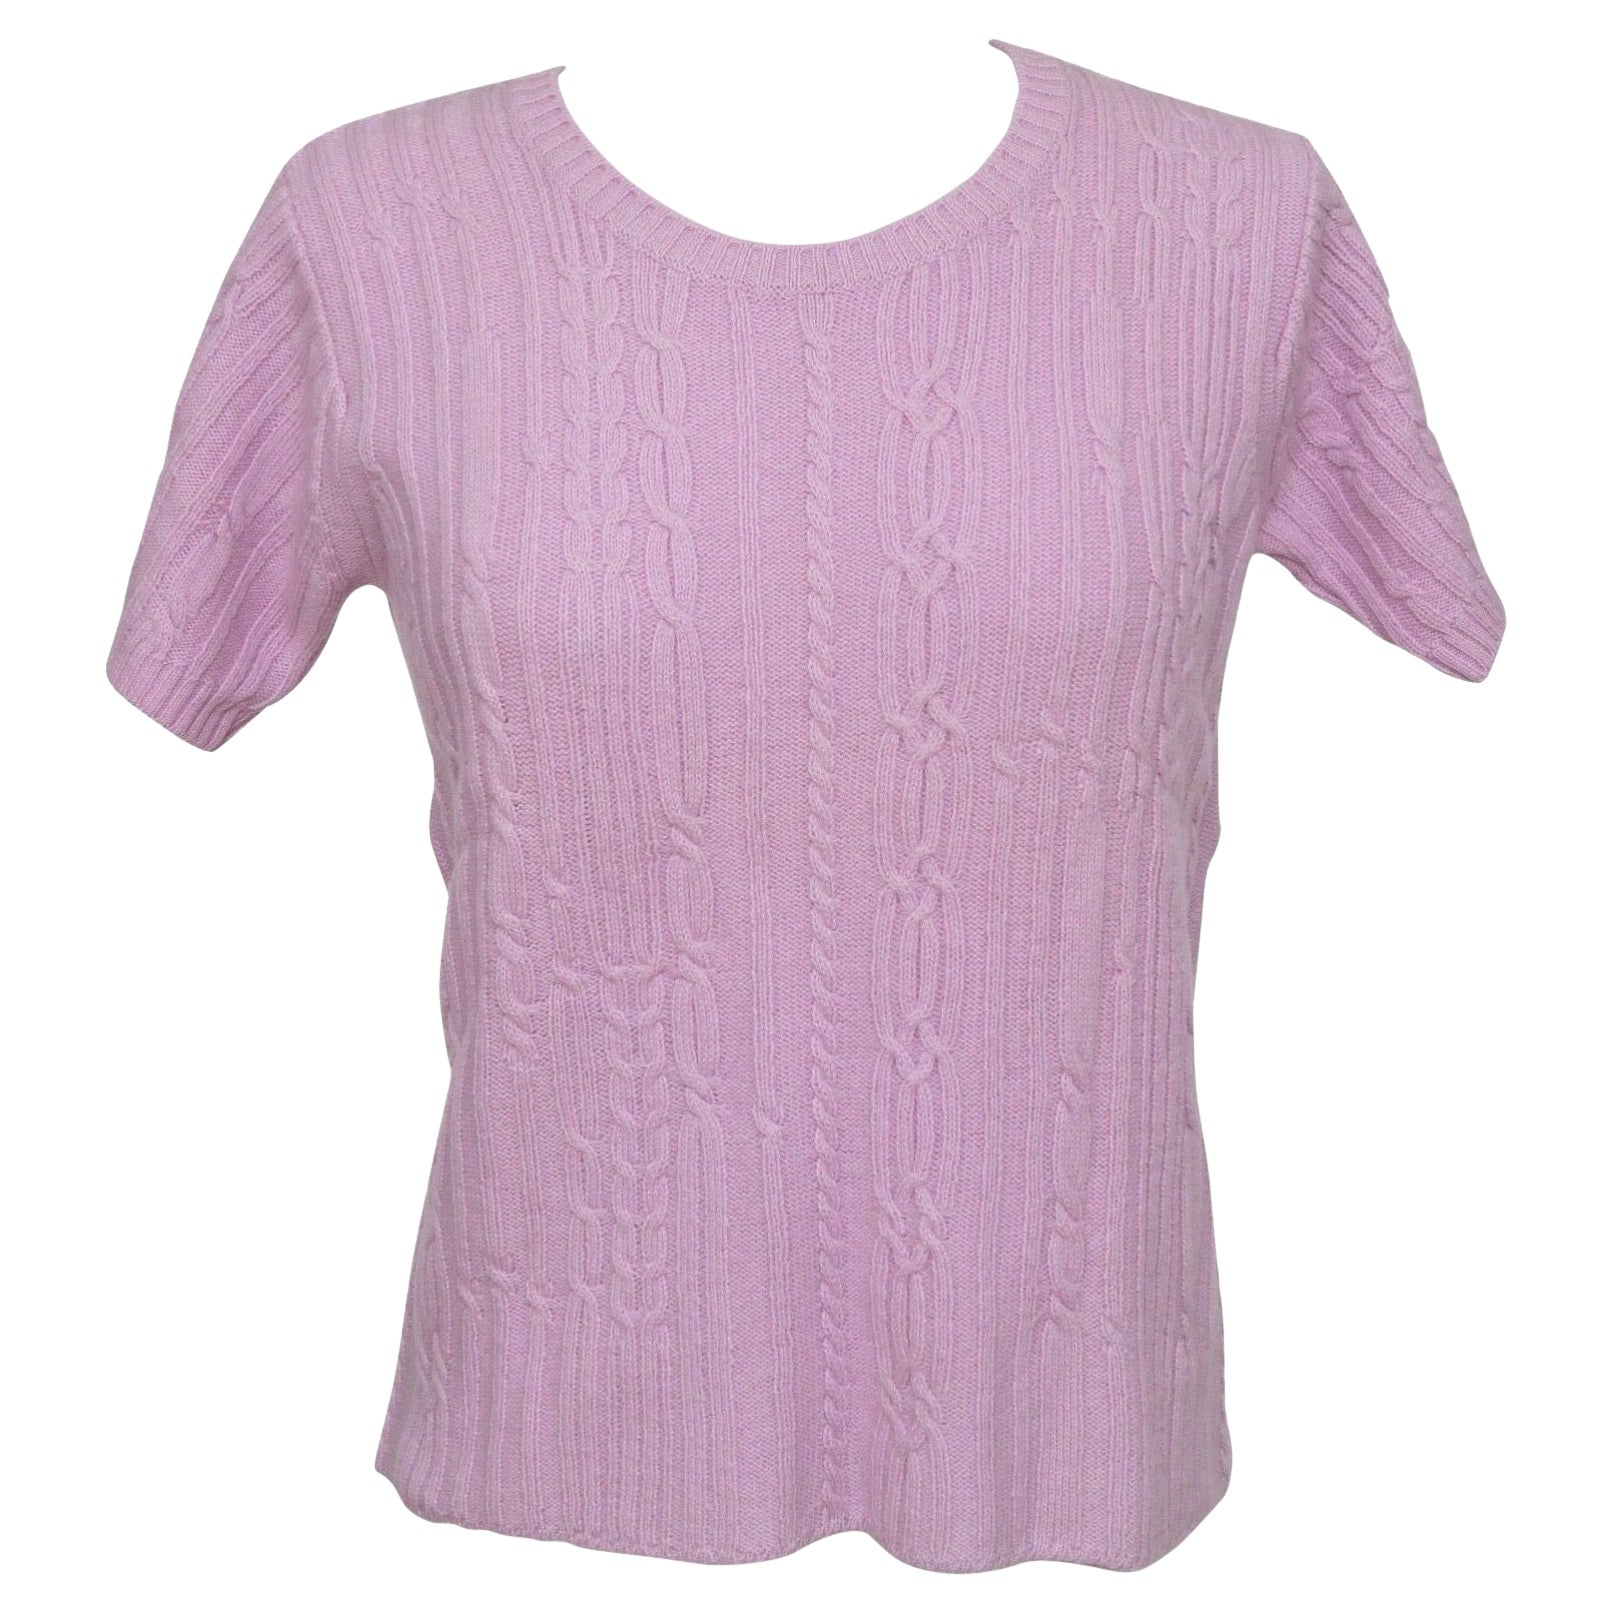 CHLOE Sweater Knit Short Sleeve Top Pink Crew Neck Wool Sz S For Sale